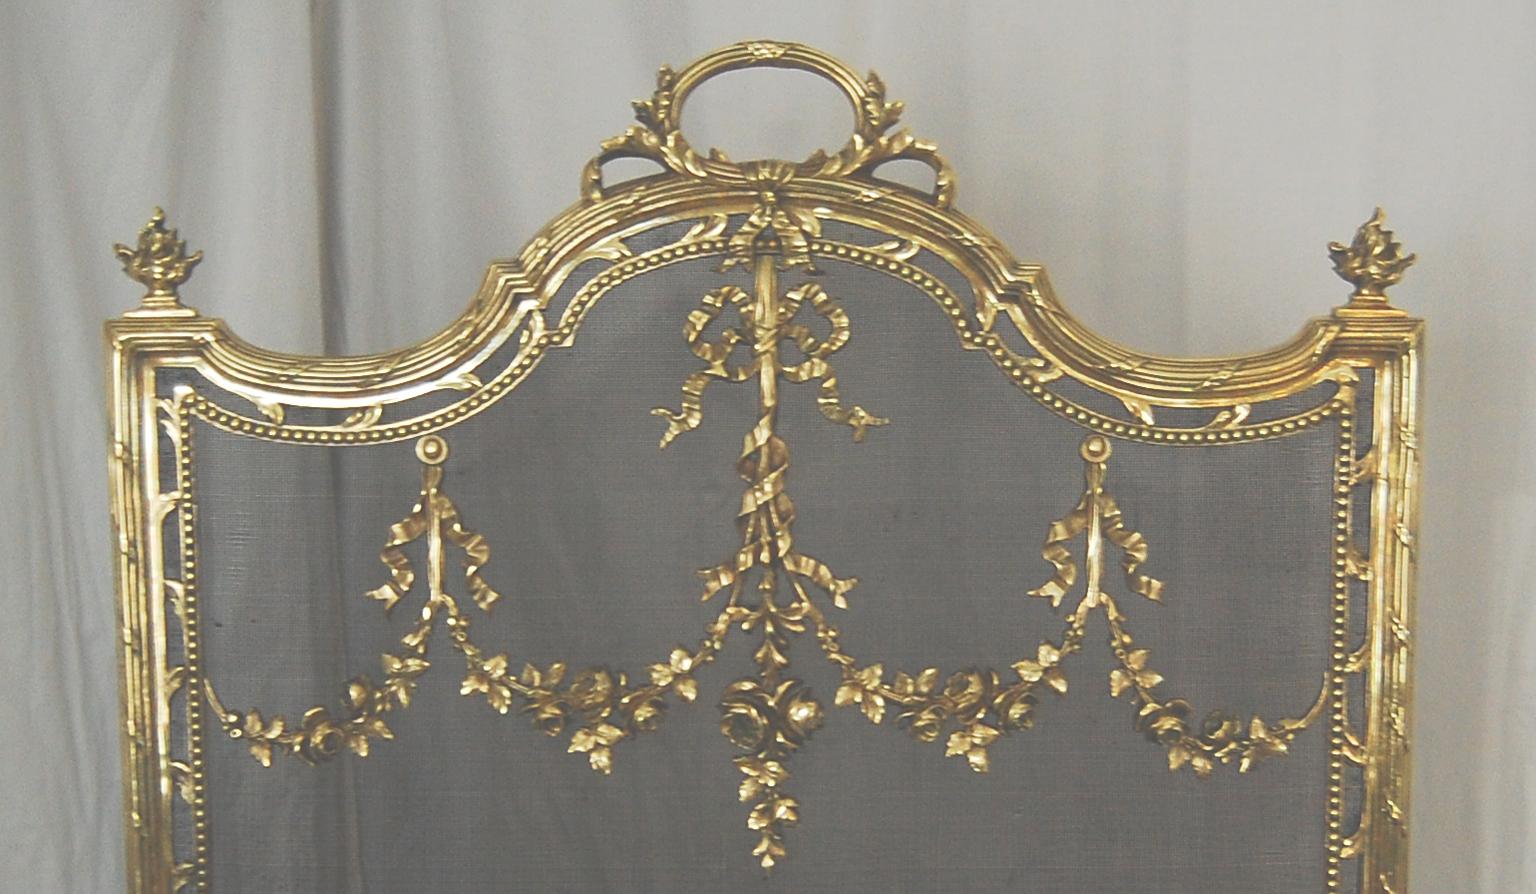  French Louis XVI style 19th century cast brass with steel mesh classic fire screen.  This heavy quality cast brass screen is adorned with floral and ribbon swags that drape over the fine steel mesh.  The integral top handle is framed by  classic